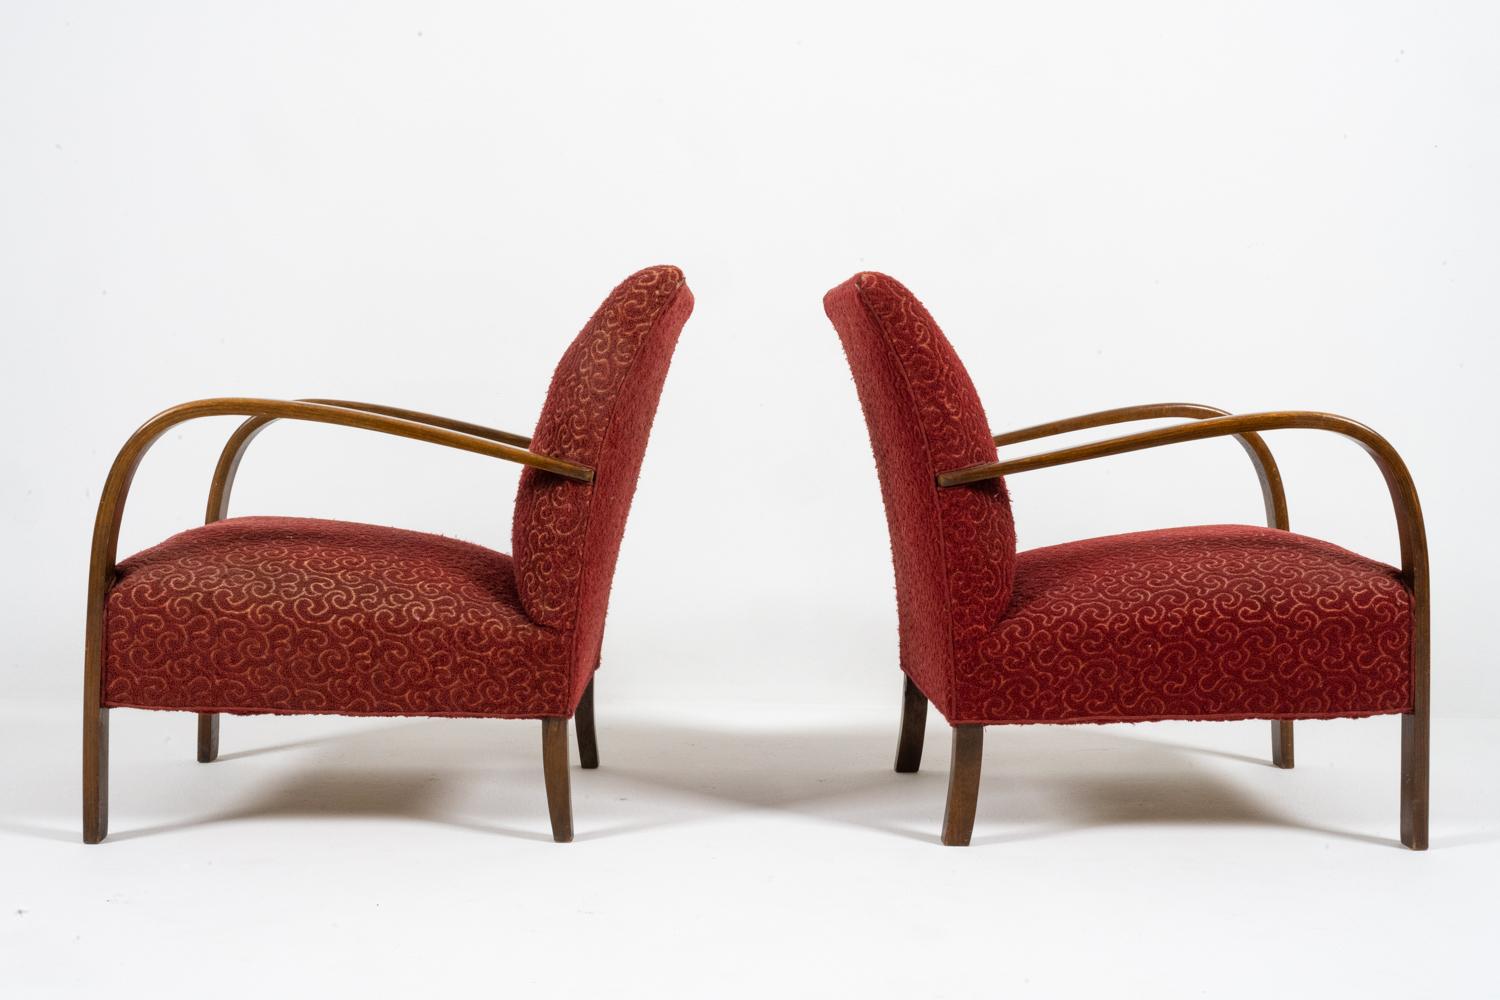 Pair of Danish Modern Lounge Chairs by Fritz Hansen, c. 1950s For Sale 6